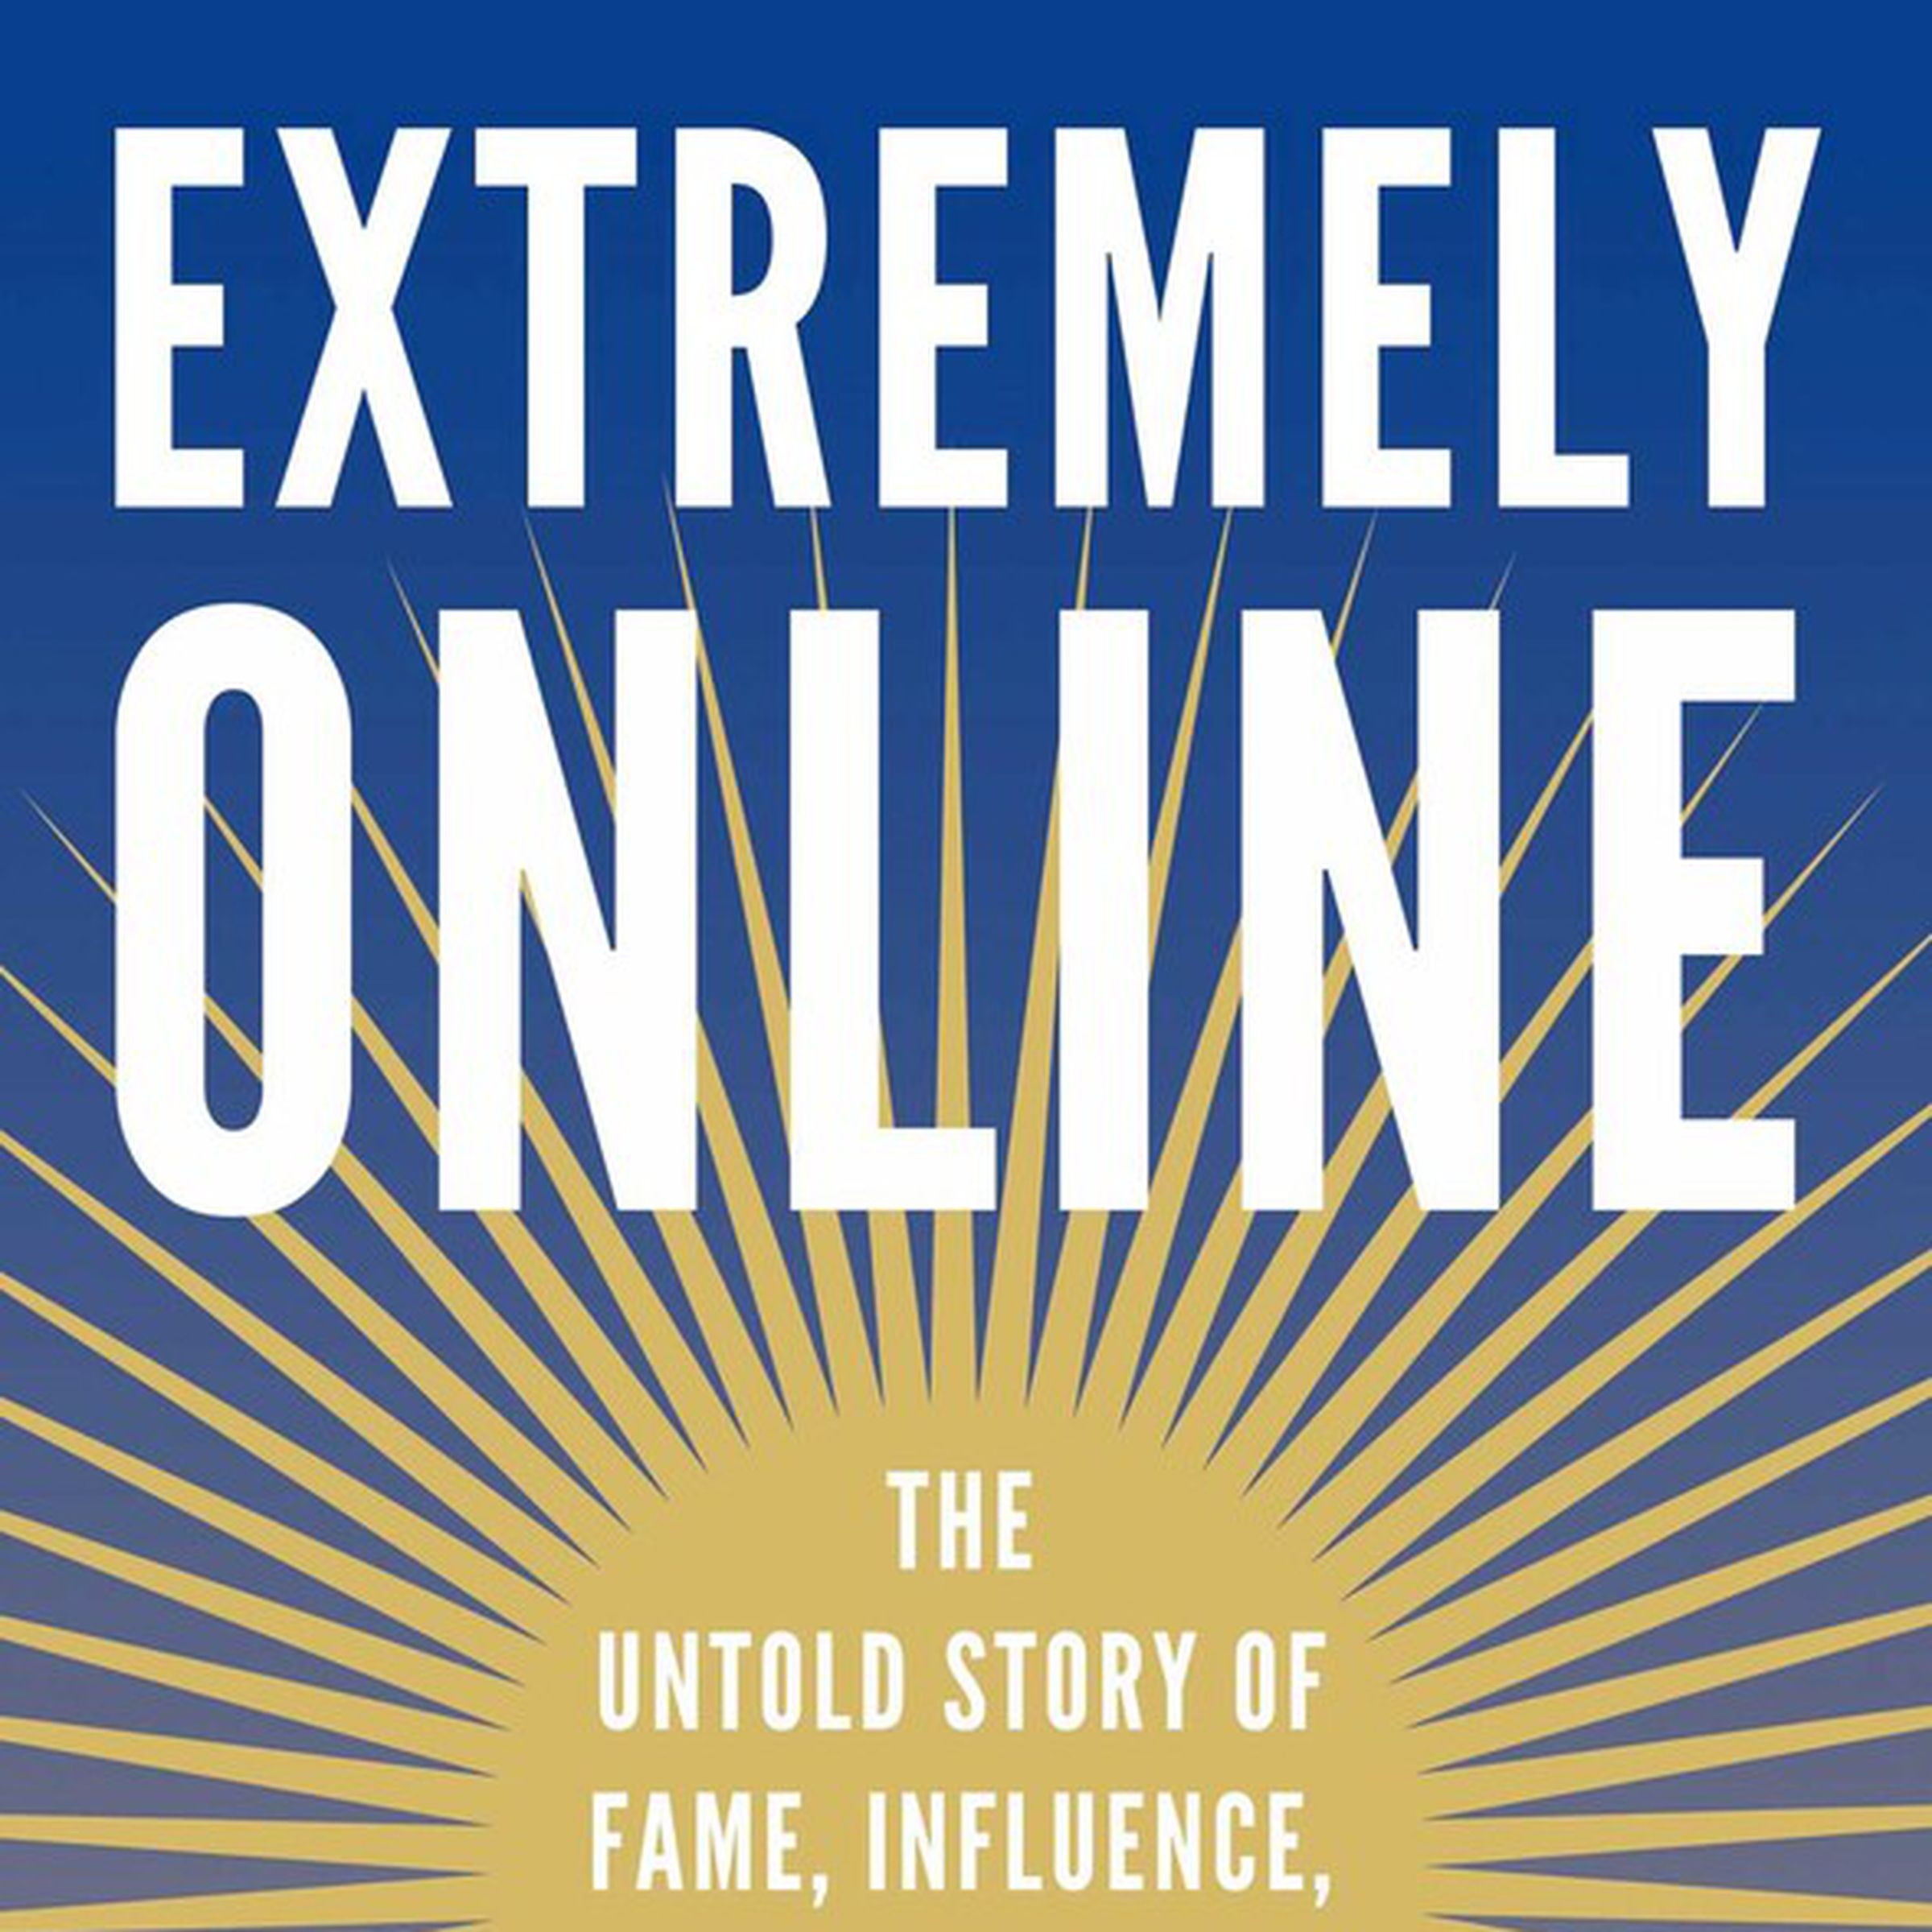 The cover art for Taylor Lorenz’s Extremely Online.